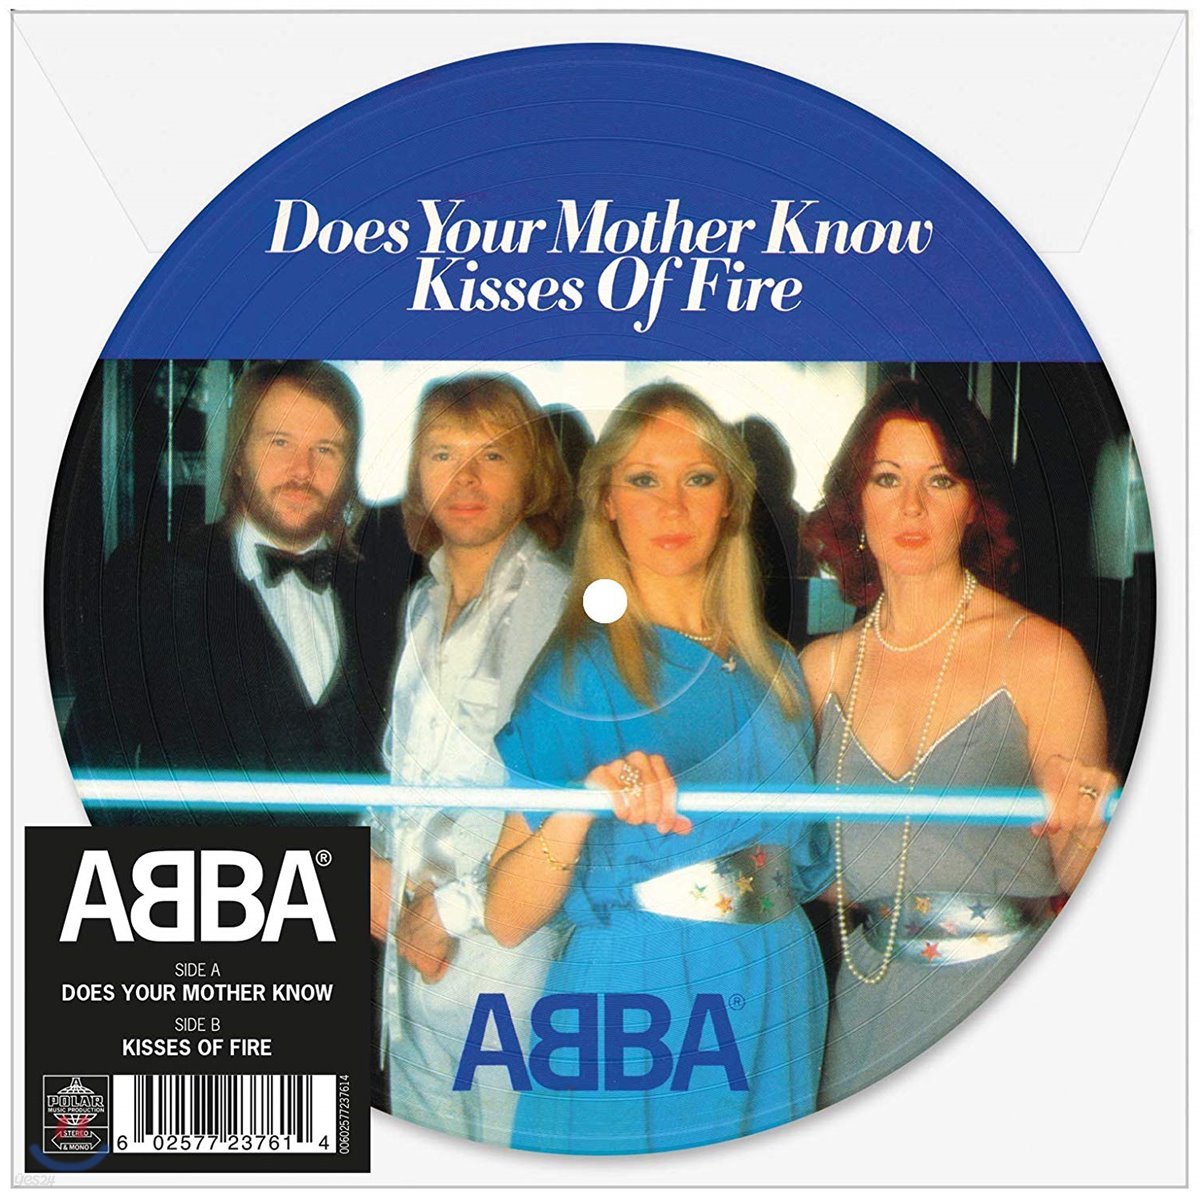 Abba (아바) - Does Your Mother Know / Kisses Of Fire [7인치 픽쳐 디스크 LP]